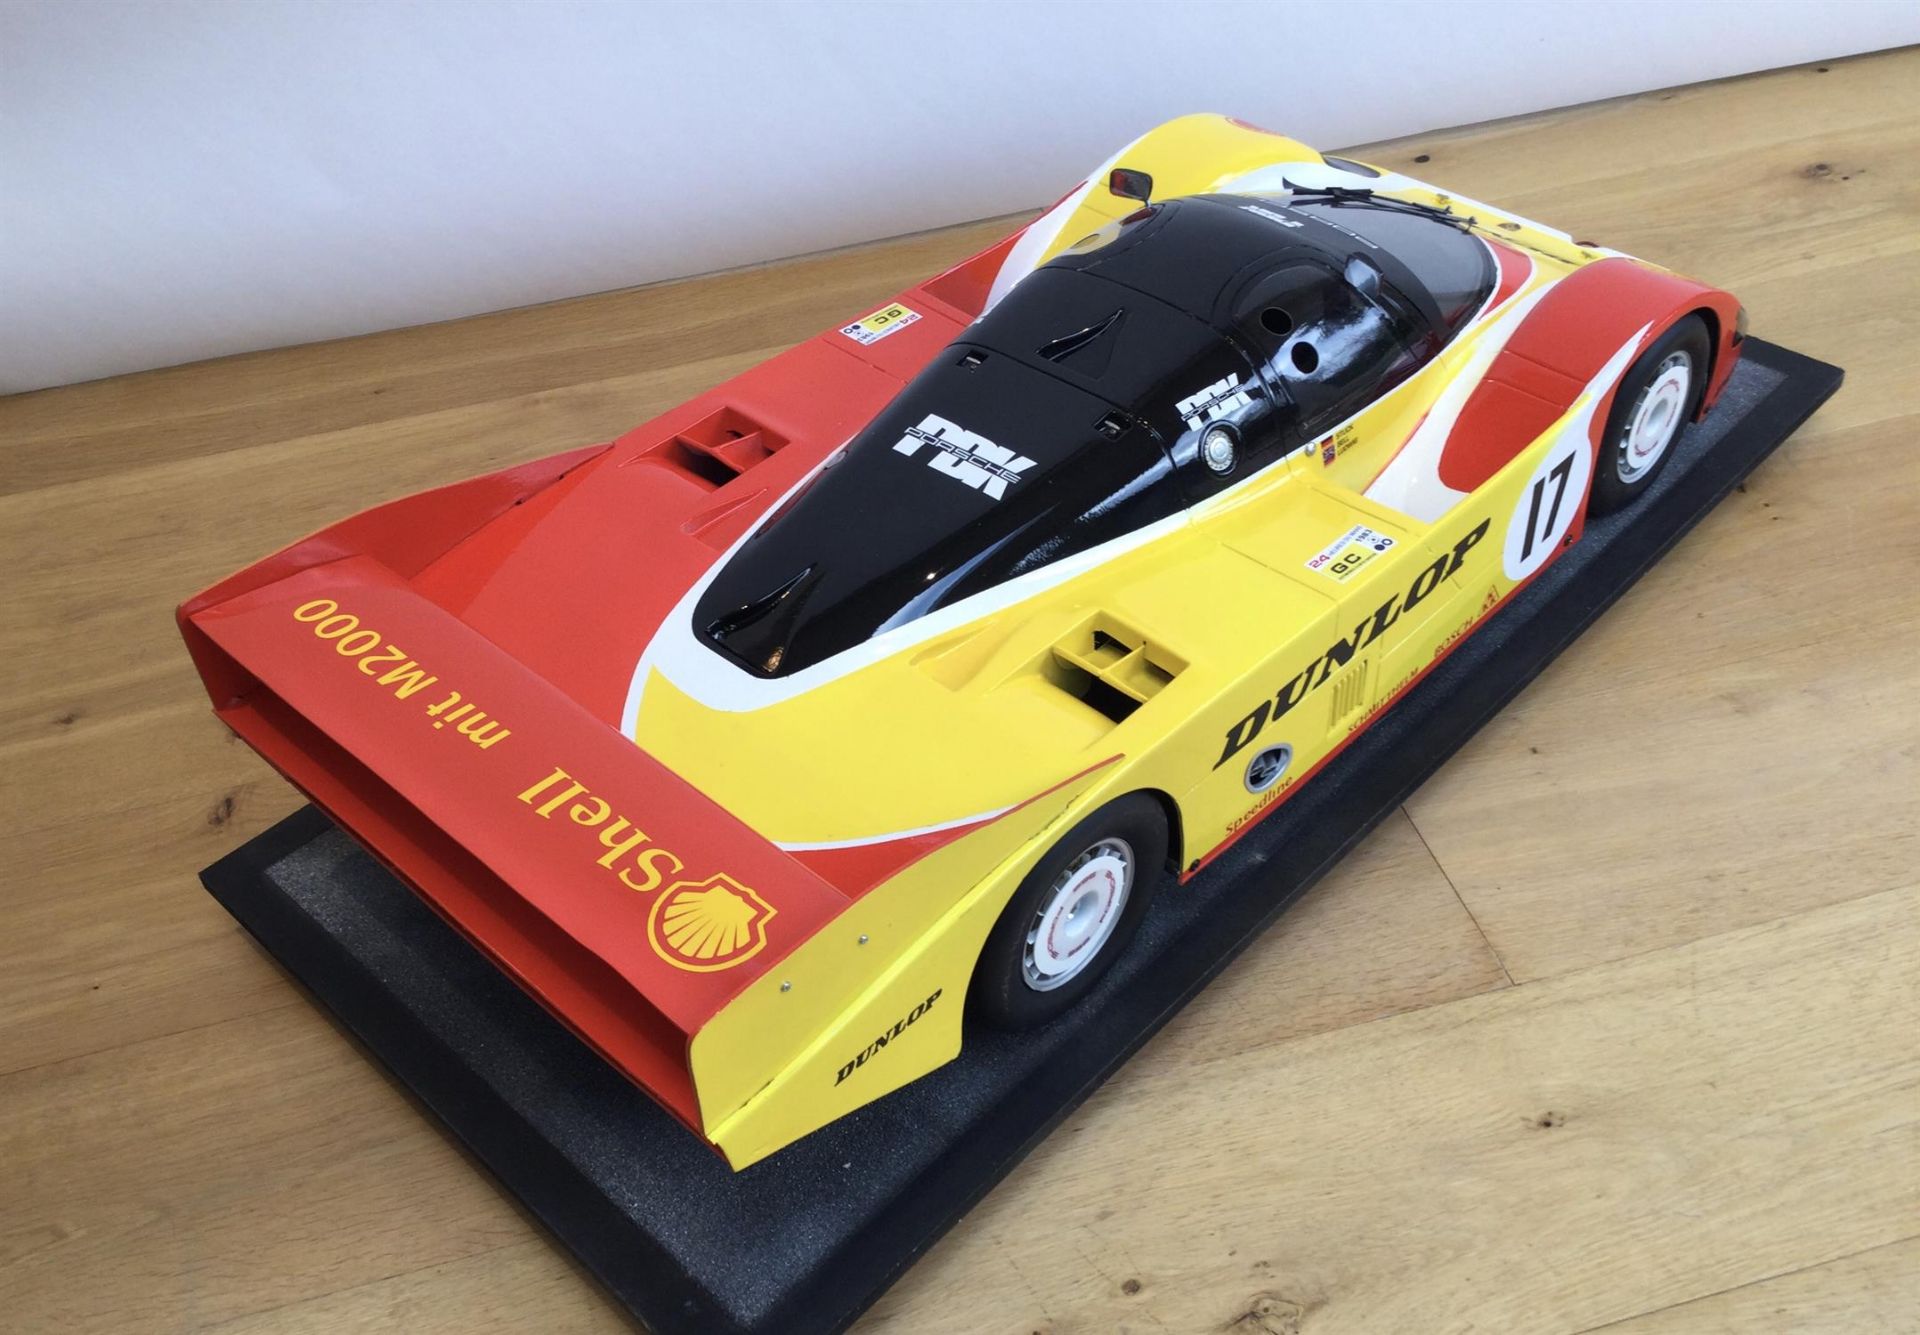 Stunning 1:5th Scale Dunlop-Shell Porsche 956 by Javan Smith - Image 7 of 10